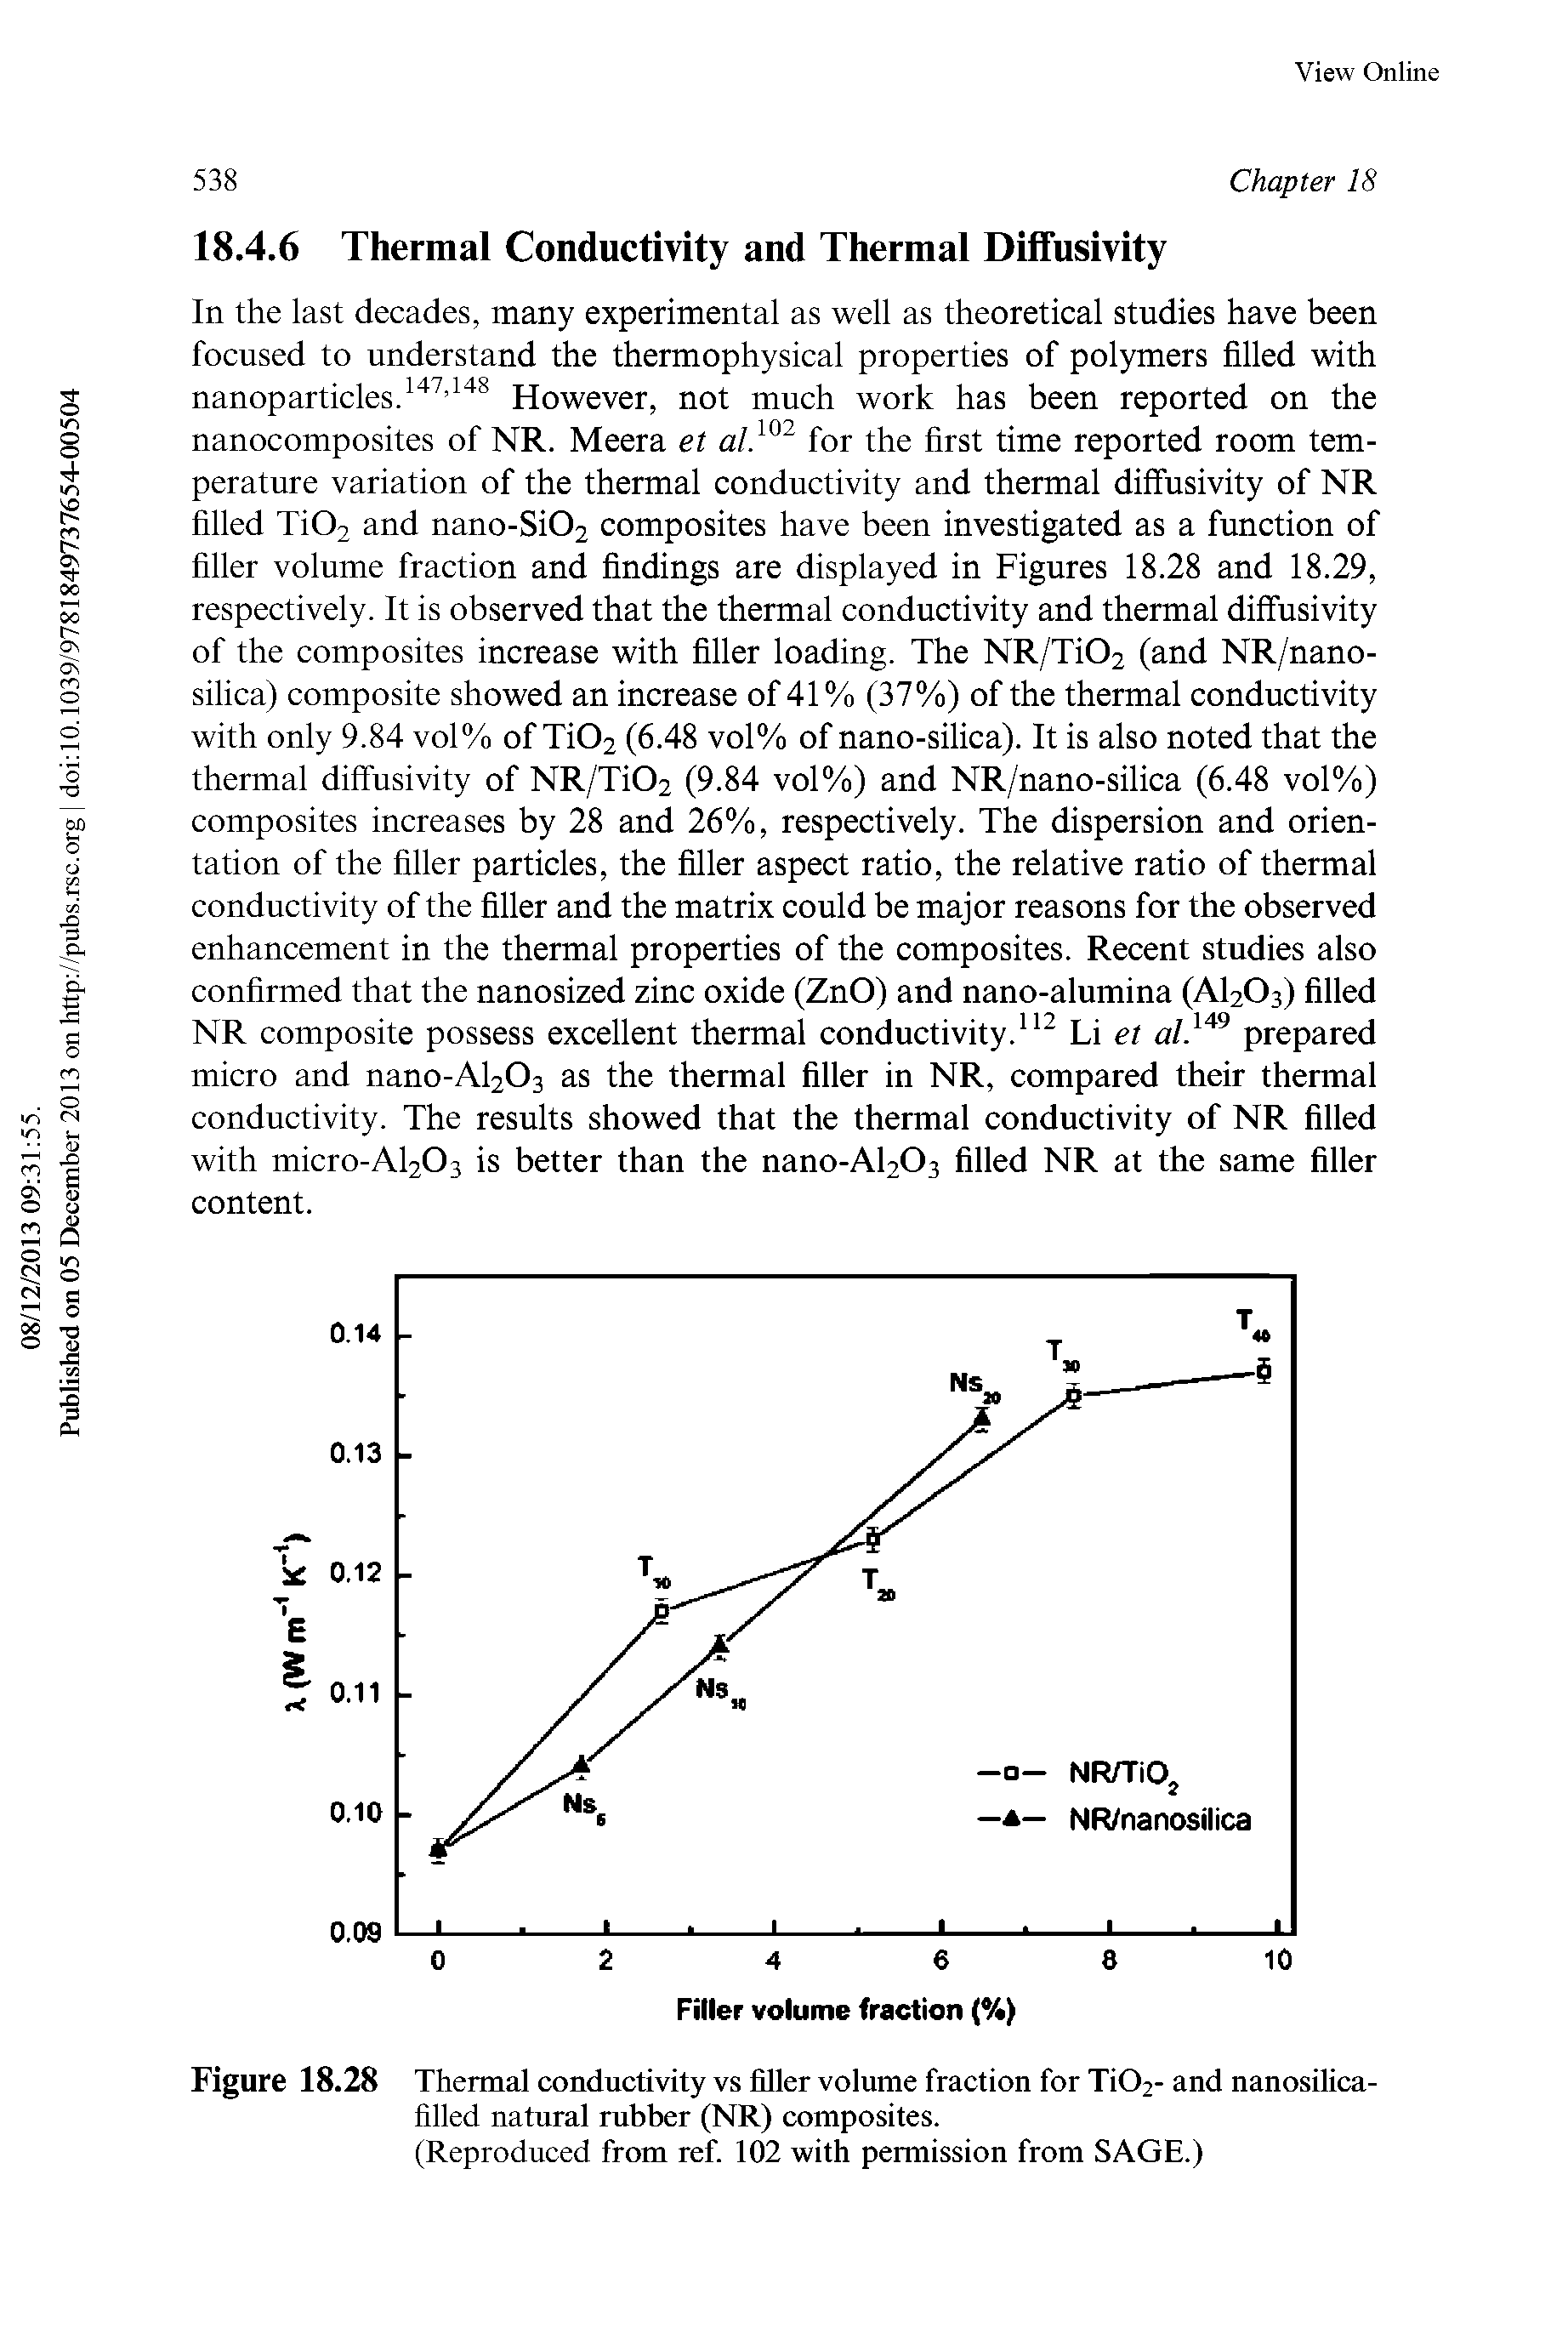 Figure 18.28 Thermal conductivity vs filler volume fraction for Ti02- and nanosilica-filled natural rubber (NR) composites.